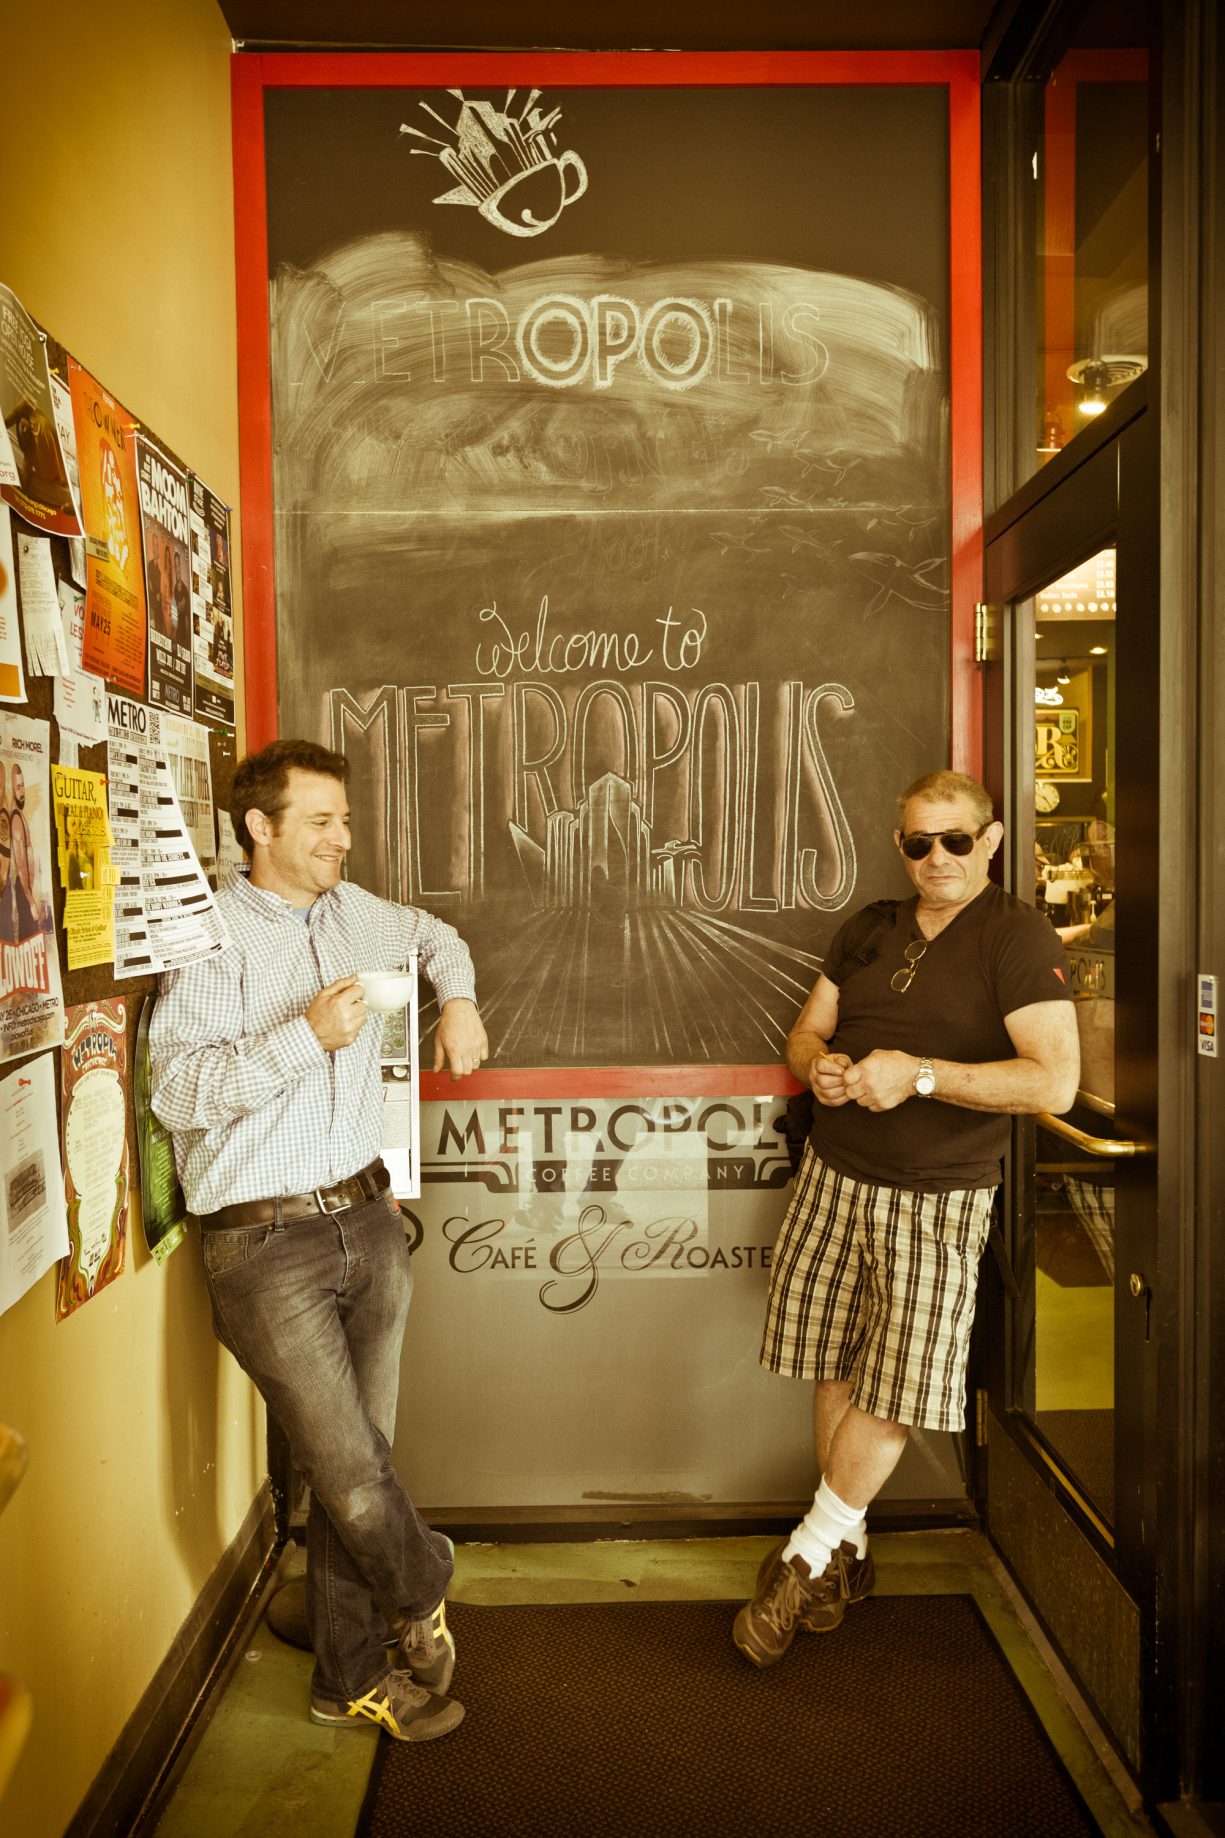 Tony and Jeff Dreyfuss lean against opposite walls in front a chalkboard that reads "Welcome to Metropolis." On left, Tony holds a cup of coffee in his hands. The photo is sepia-toned.